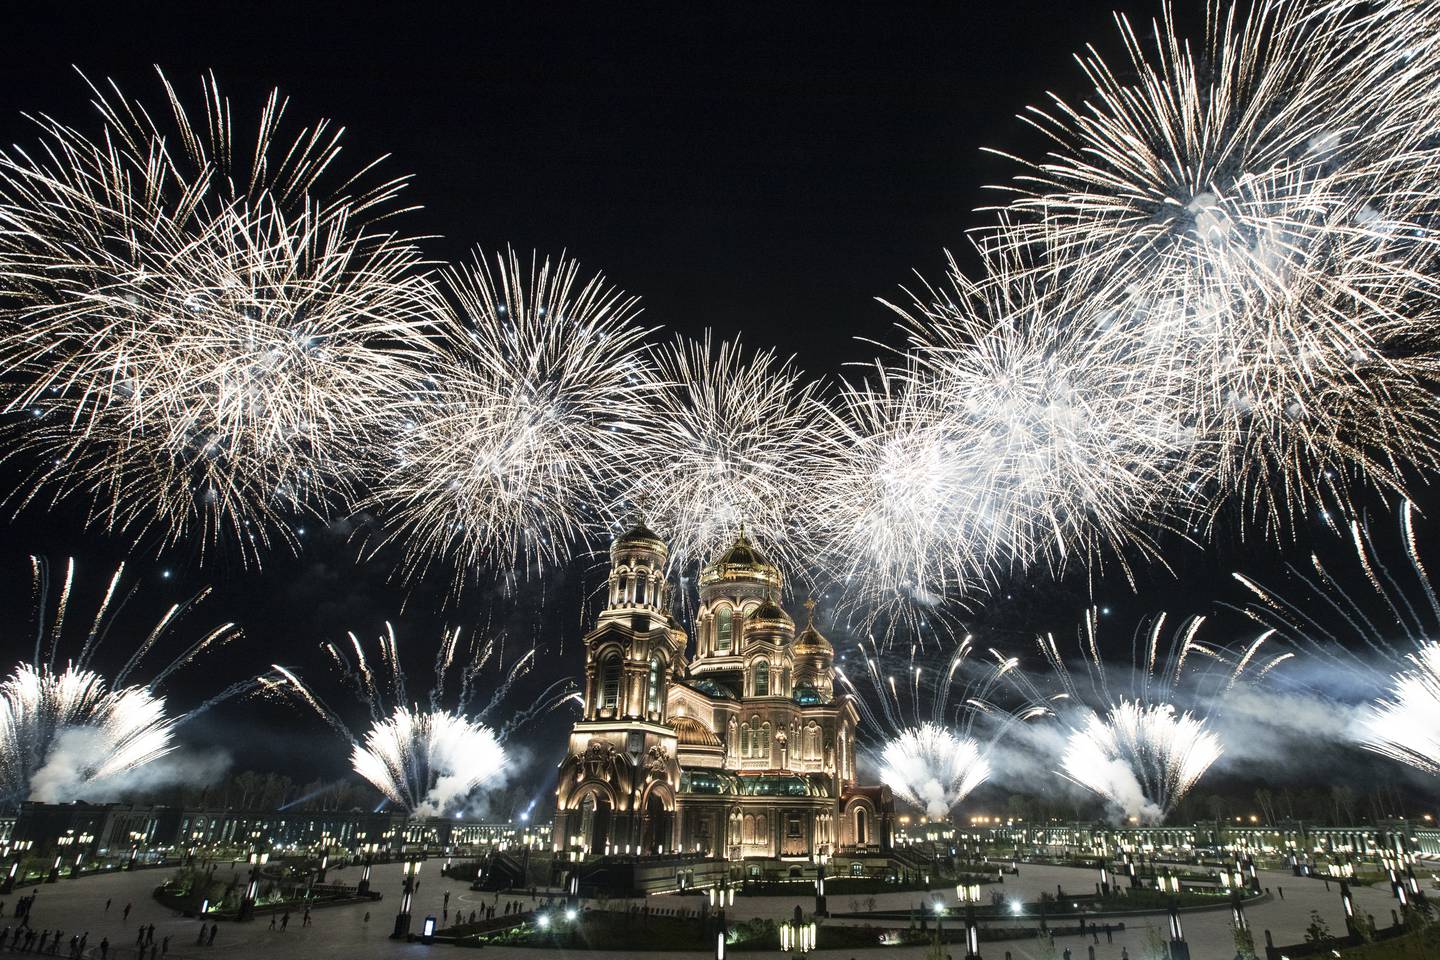 Fireworks explode over the Cathedral of Russian Armed Forces during the Spasskaya Tower military music festival in Kubinka, outside Moscow, Russia, Sunday, Sept. 6, 2020. Due to coronavirus, the annual international music festival in Red Square was canceled, an online festival without spectators took place Sunday on the Cathedral Square in Patriot Park, outside Moscow. (AP Photo/Pavel Golovkin)